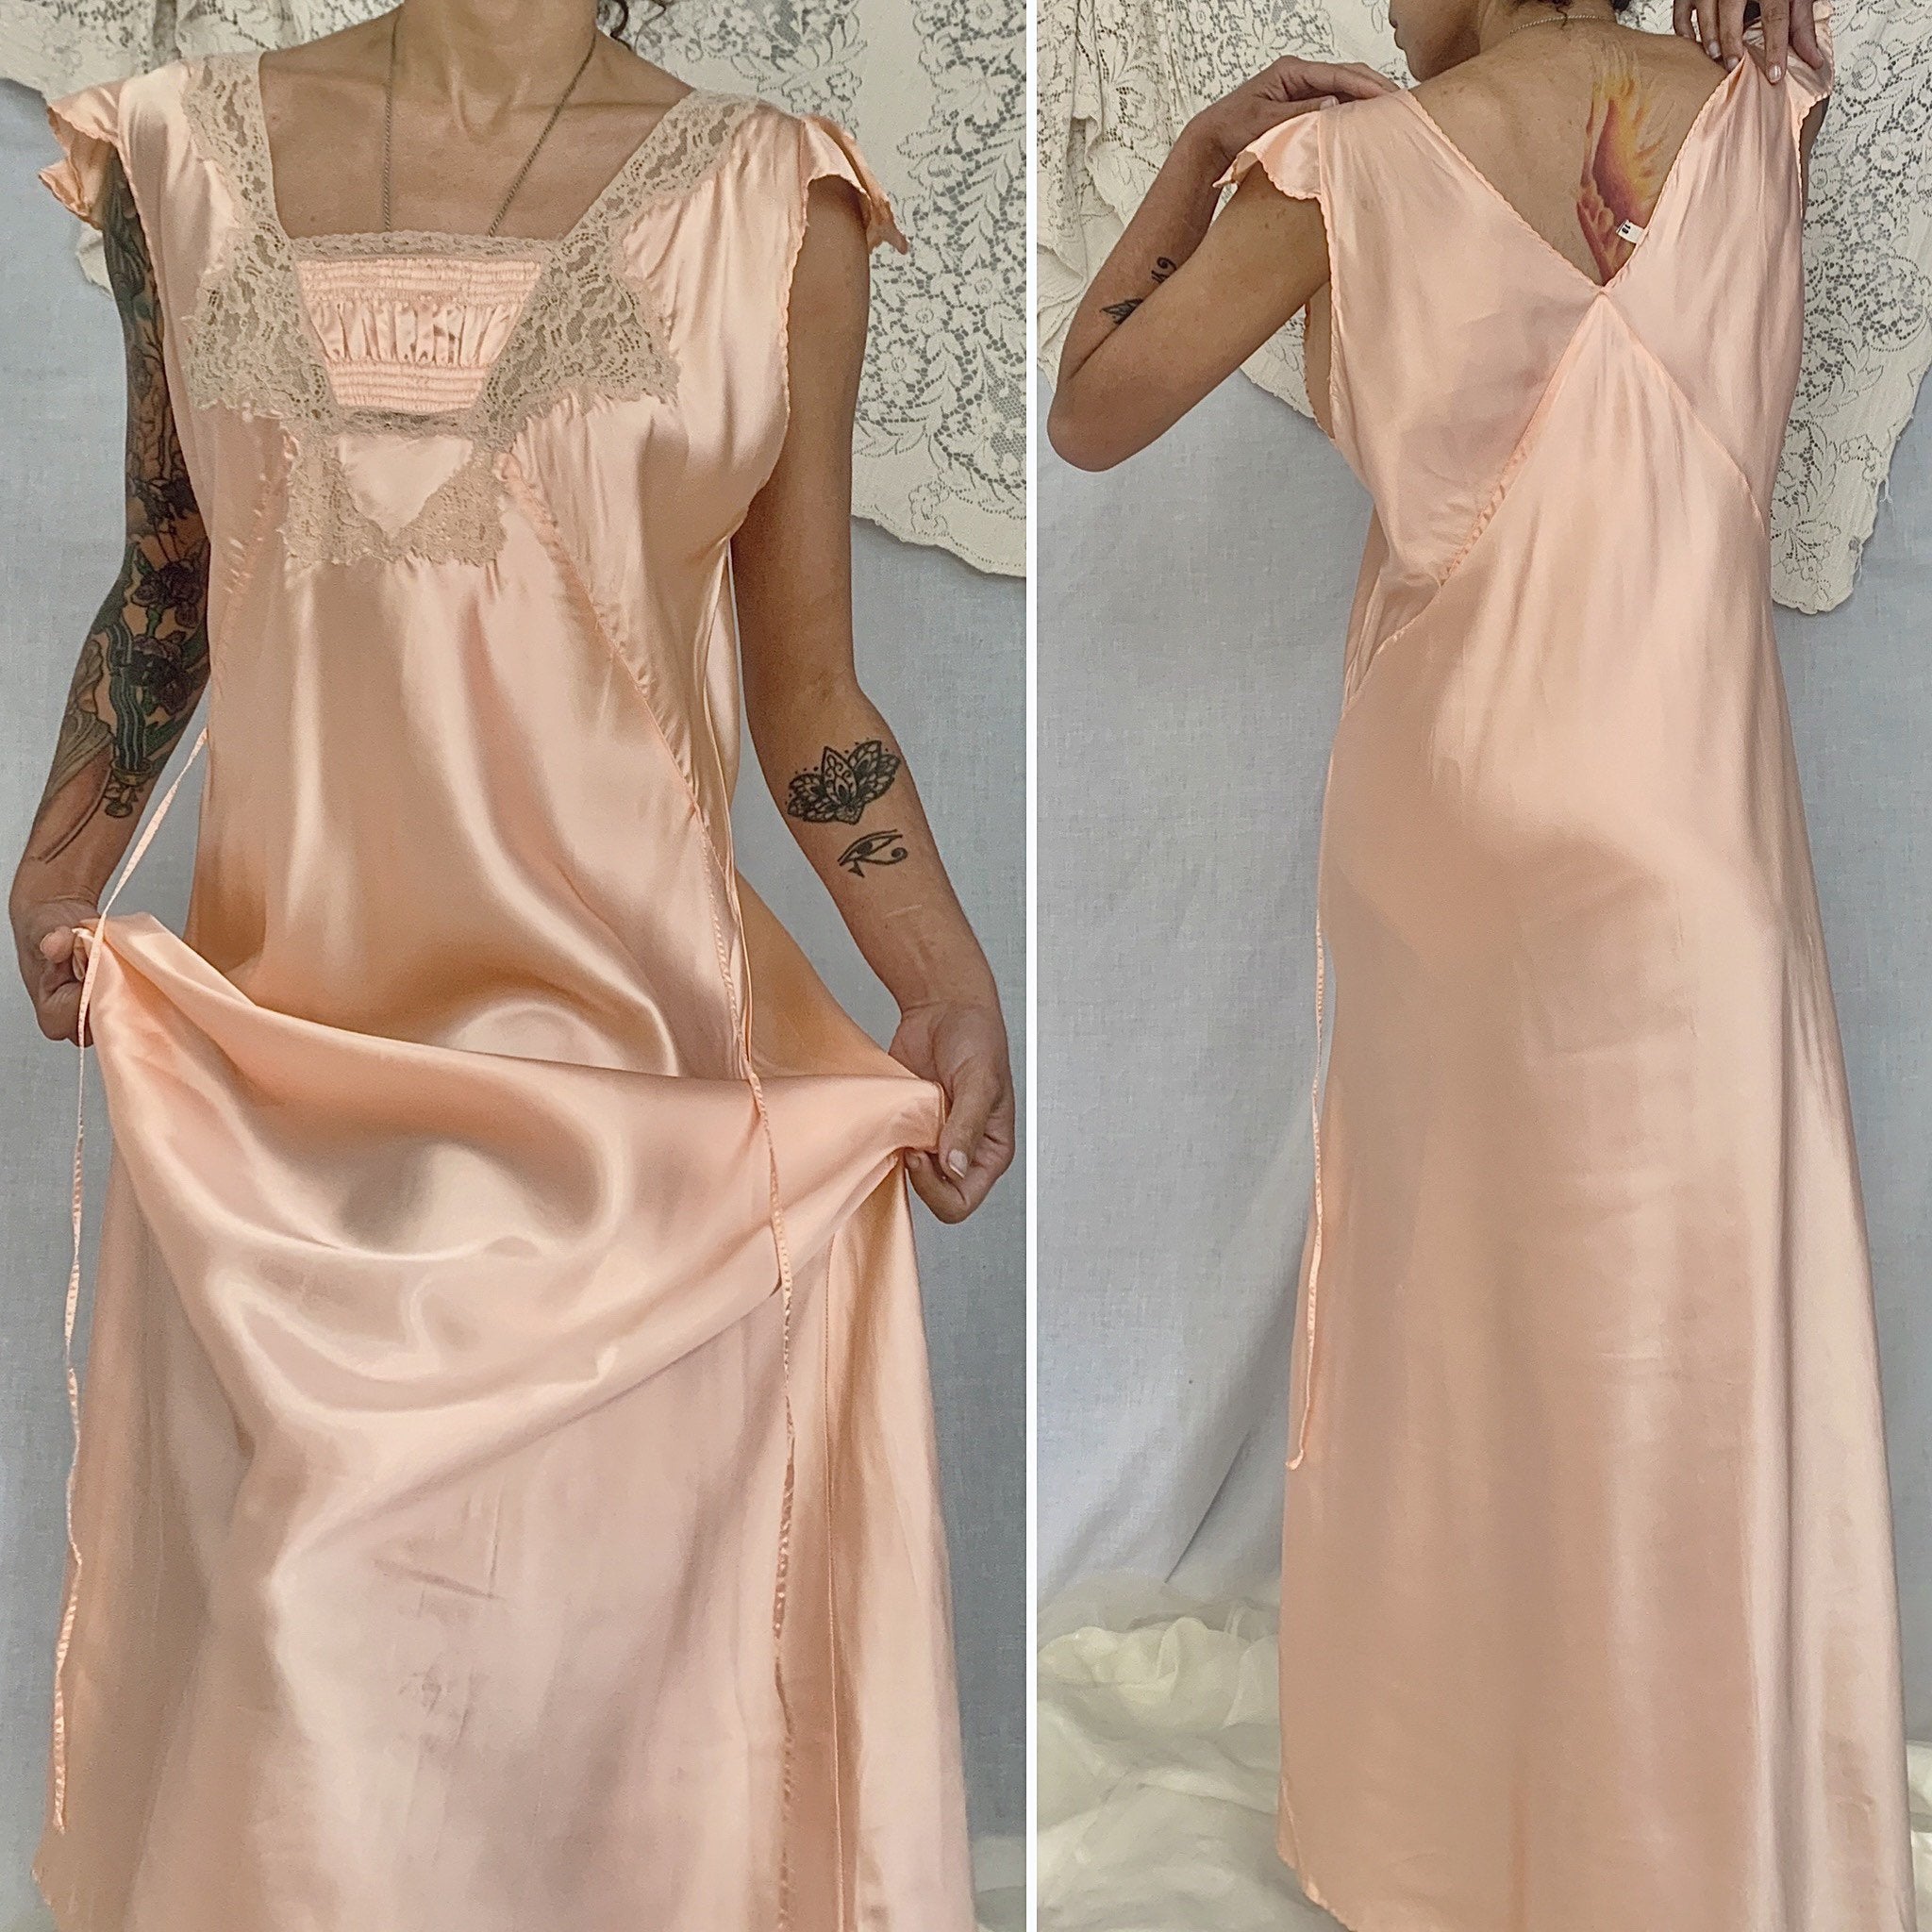 Resoneer Luchtvaart appel Vintage 1940's Nightgown | Blush Pink Rayon Satin with Nude Lace | Size XXL  | NOS -